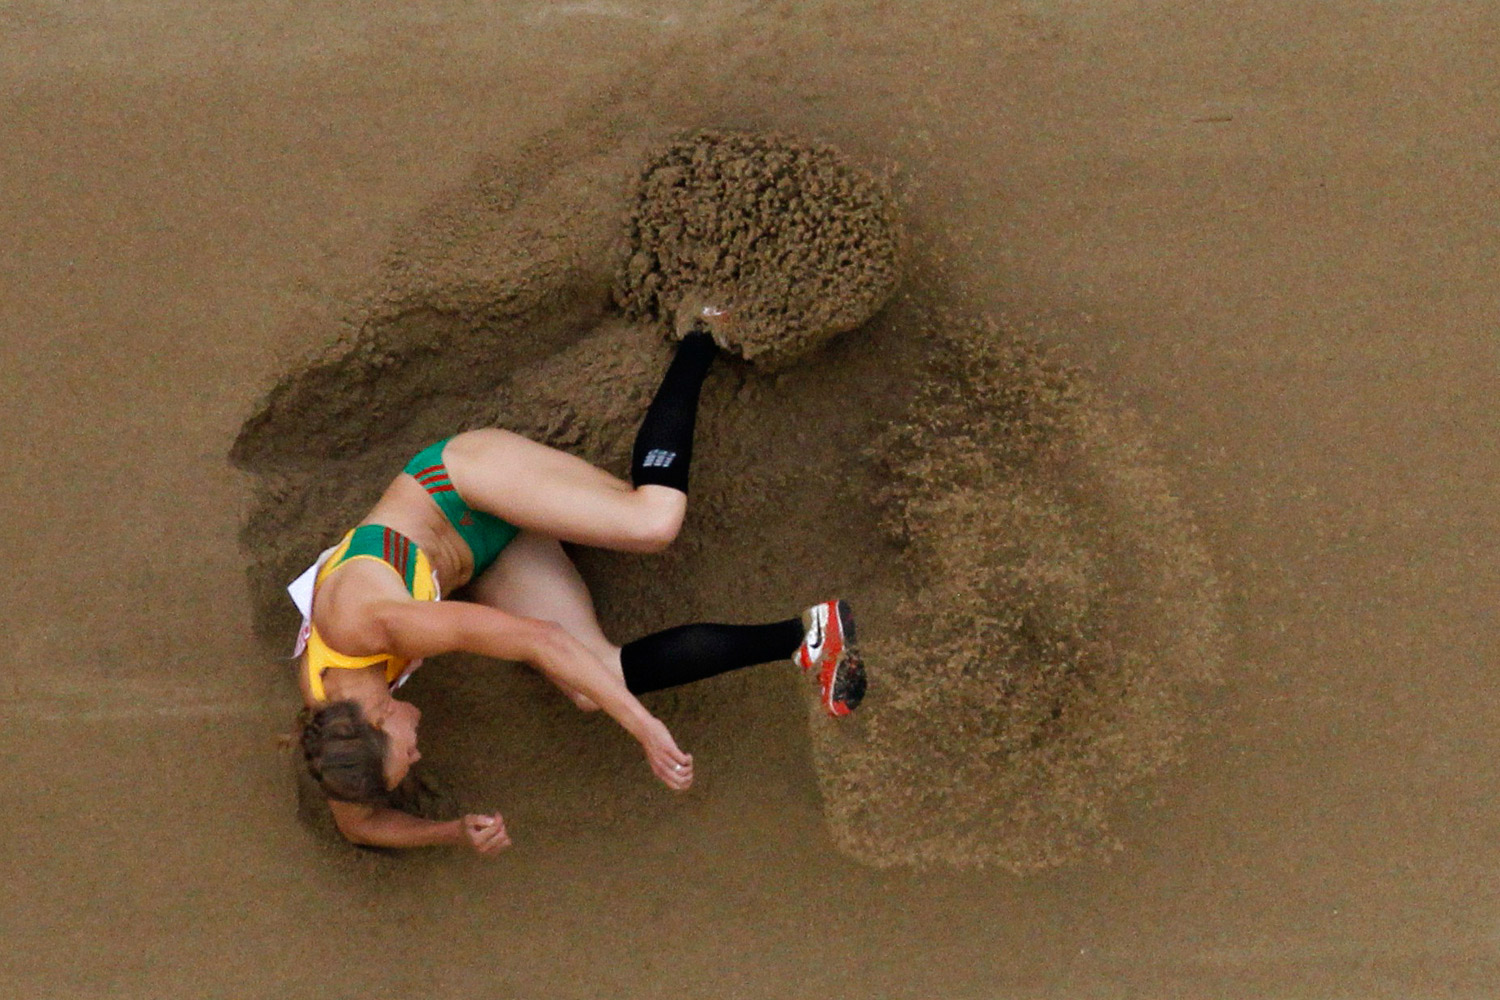 Austra Skujyte of Lithuania competes during the long jump event of the heptathlon at the IAAF World Championships in Daegu, South Korea, August 30, 2011.